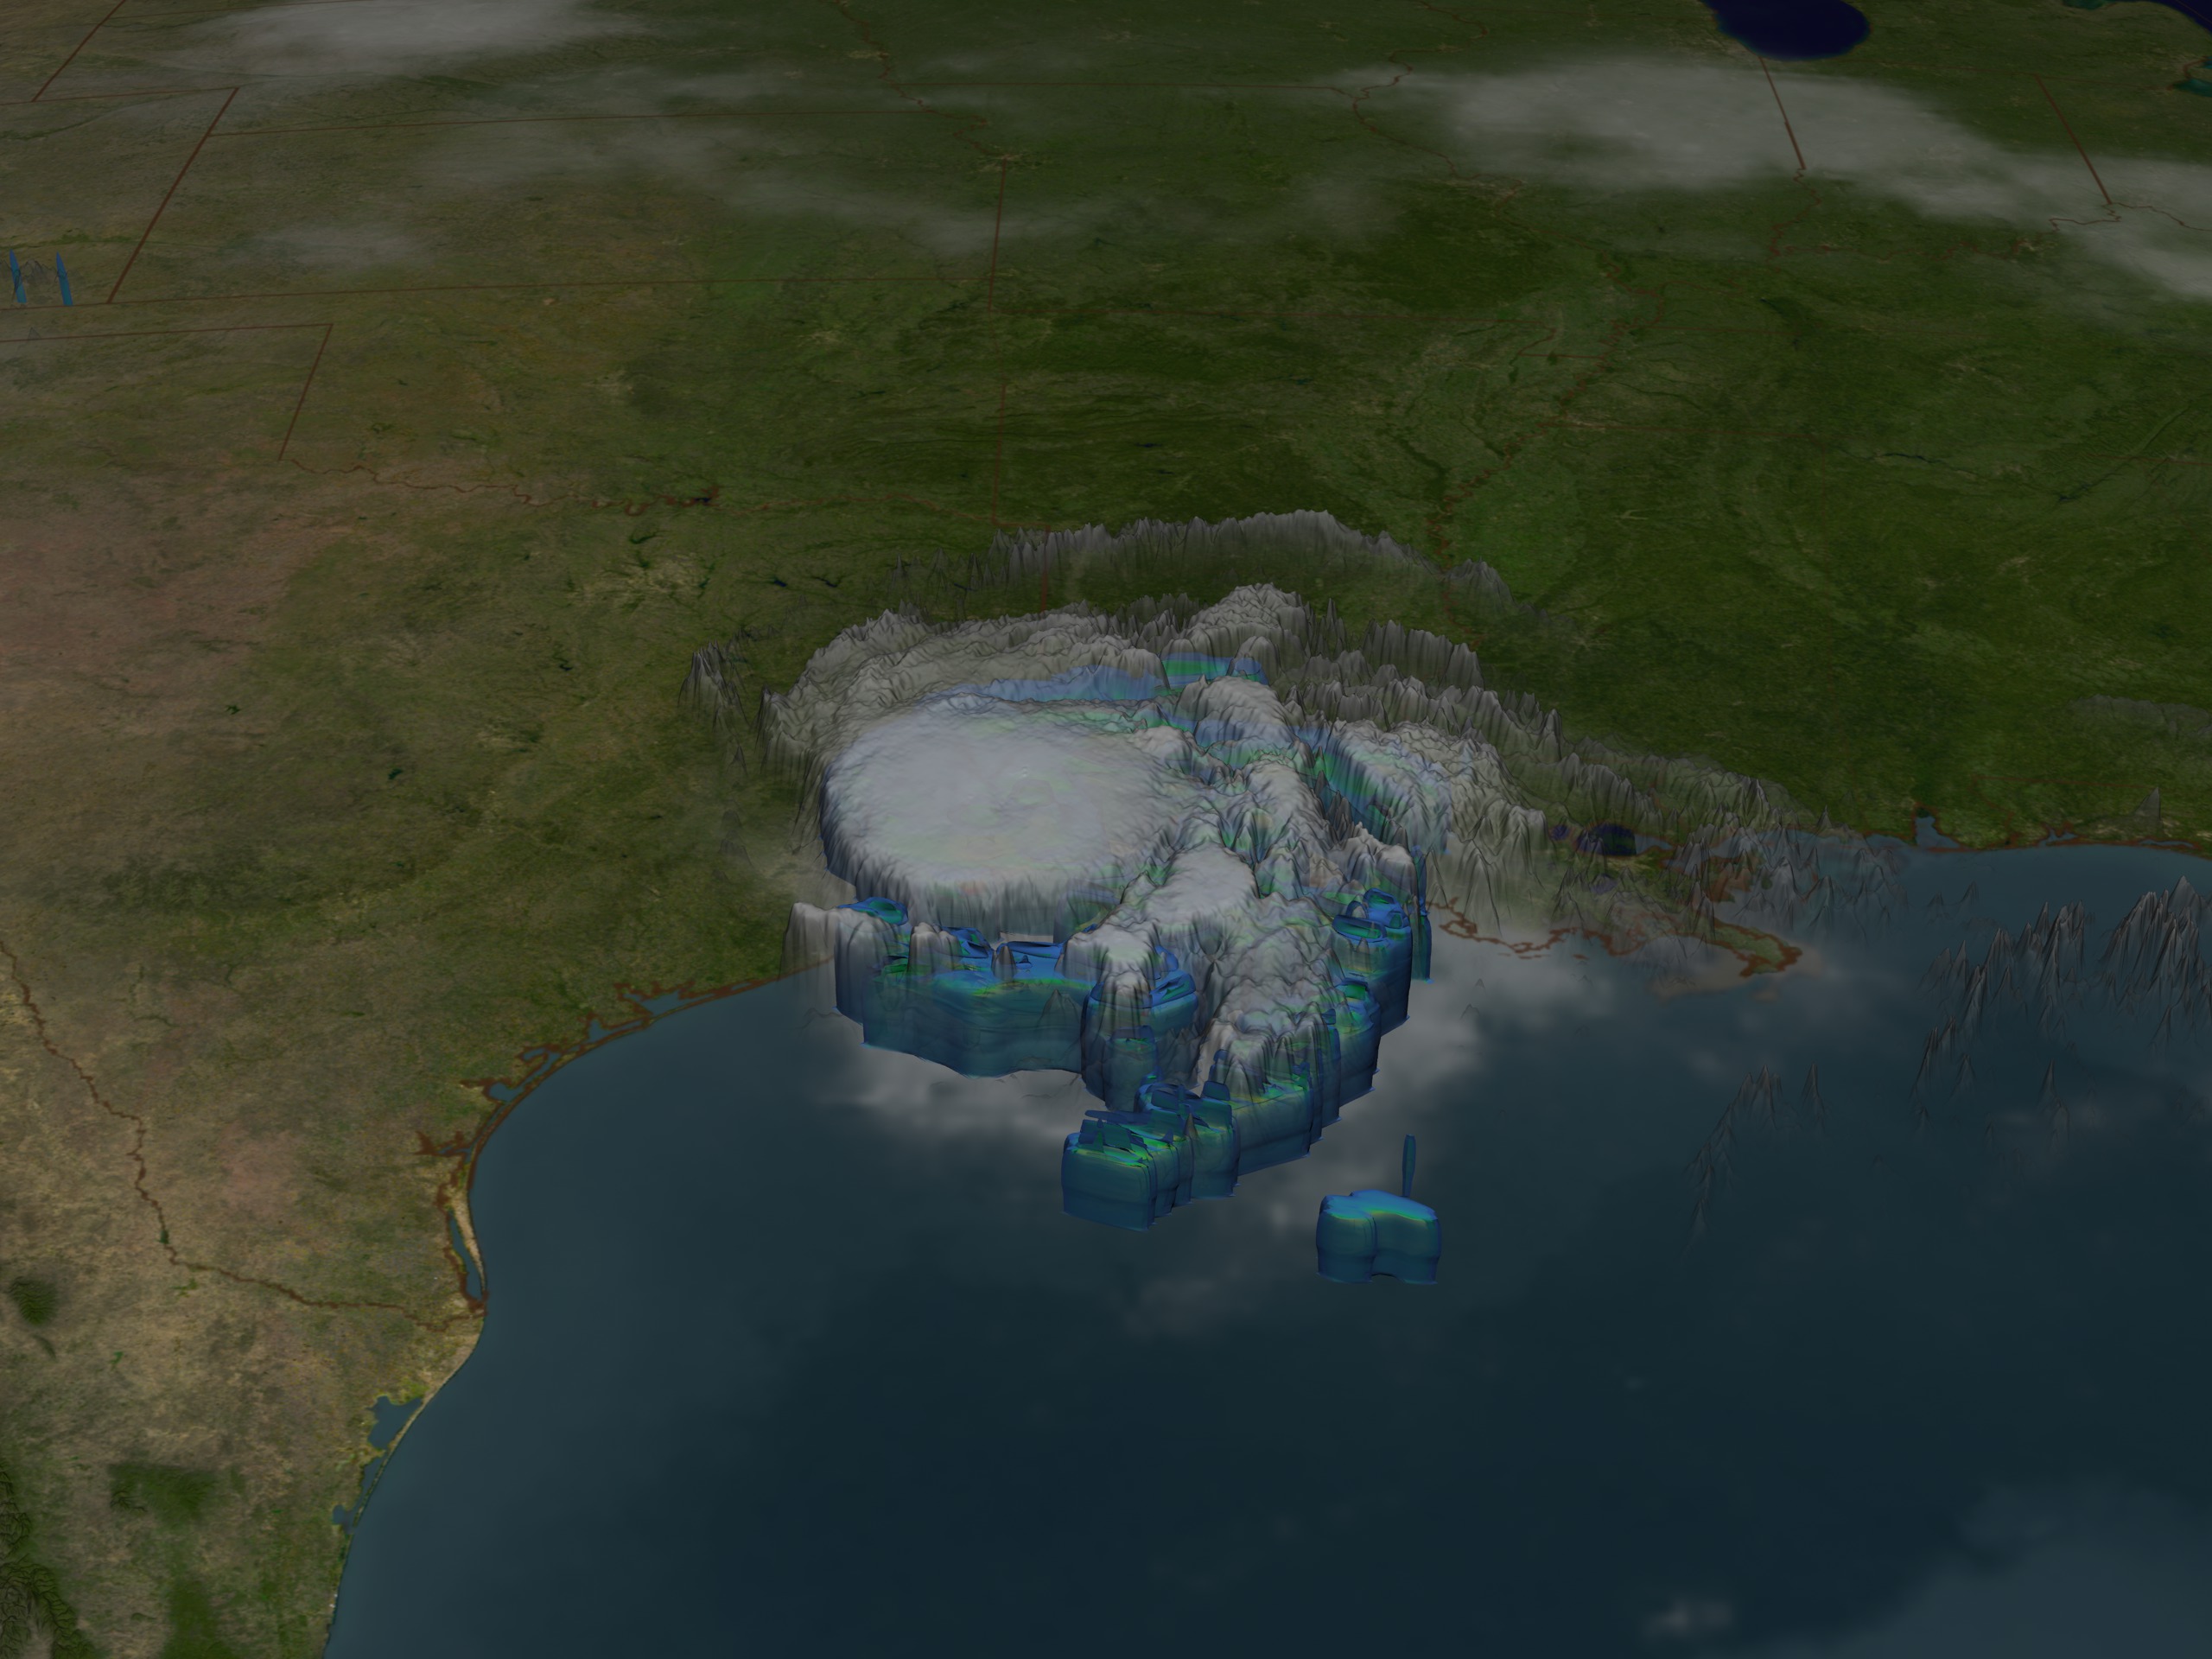 Tropical Storm Eduoard on August 5, 2008. Peer through the clouds to see the storms structure. The blue region represents areas where the storm is dumping at least 0.25 inches of rain per hour and the green region is raining 0.5 inches of inches per hour.